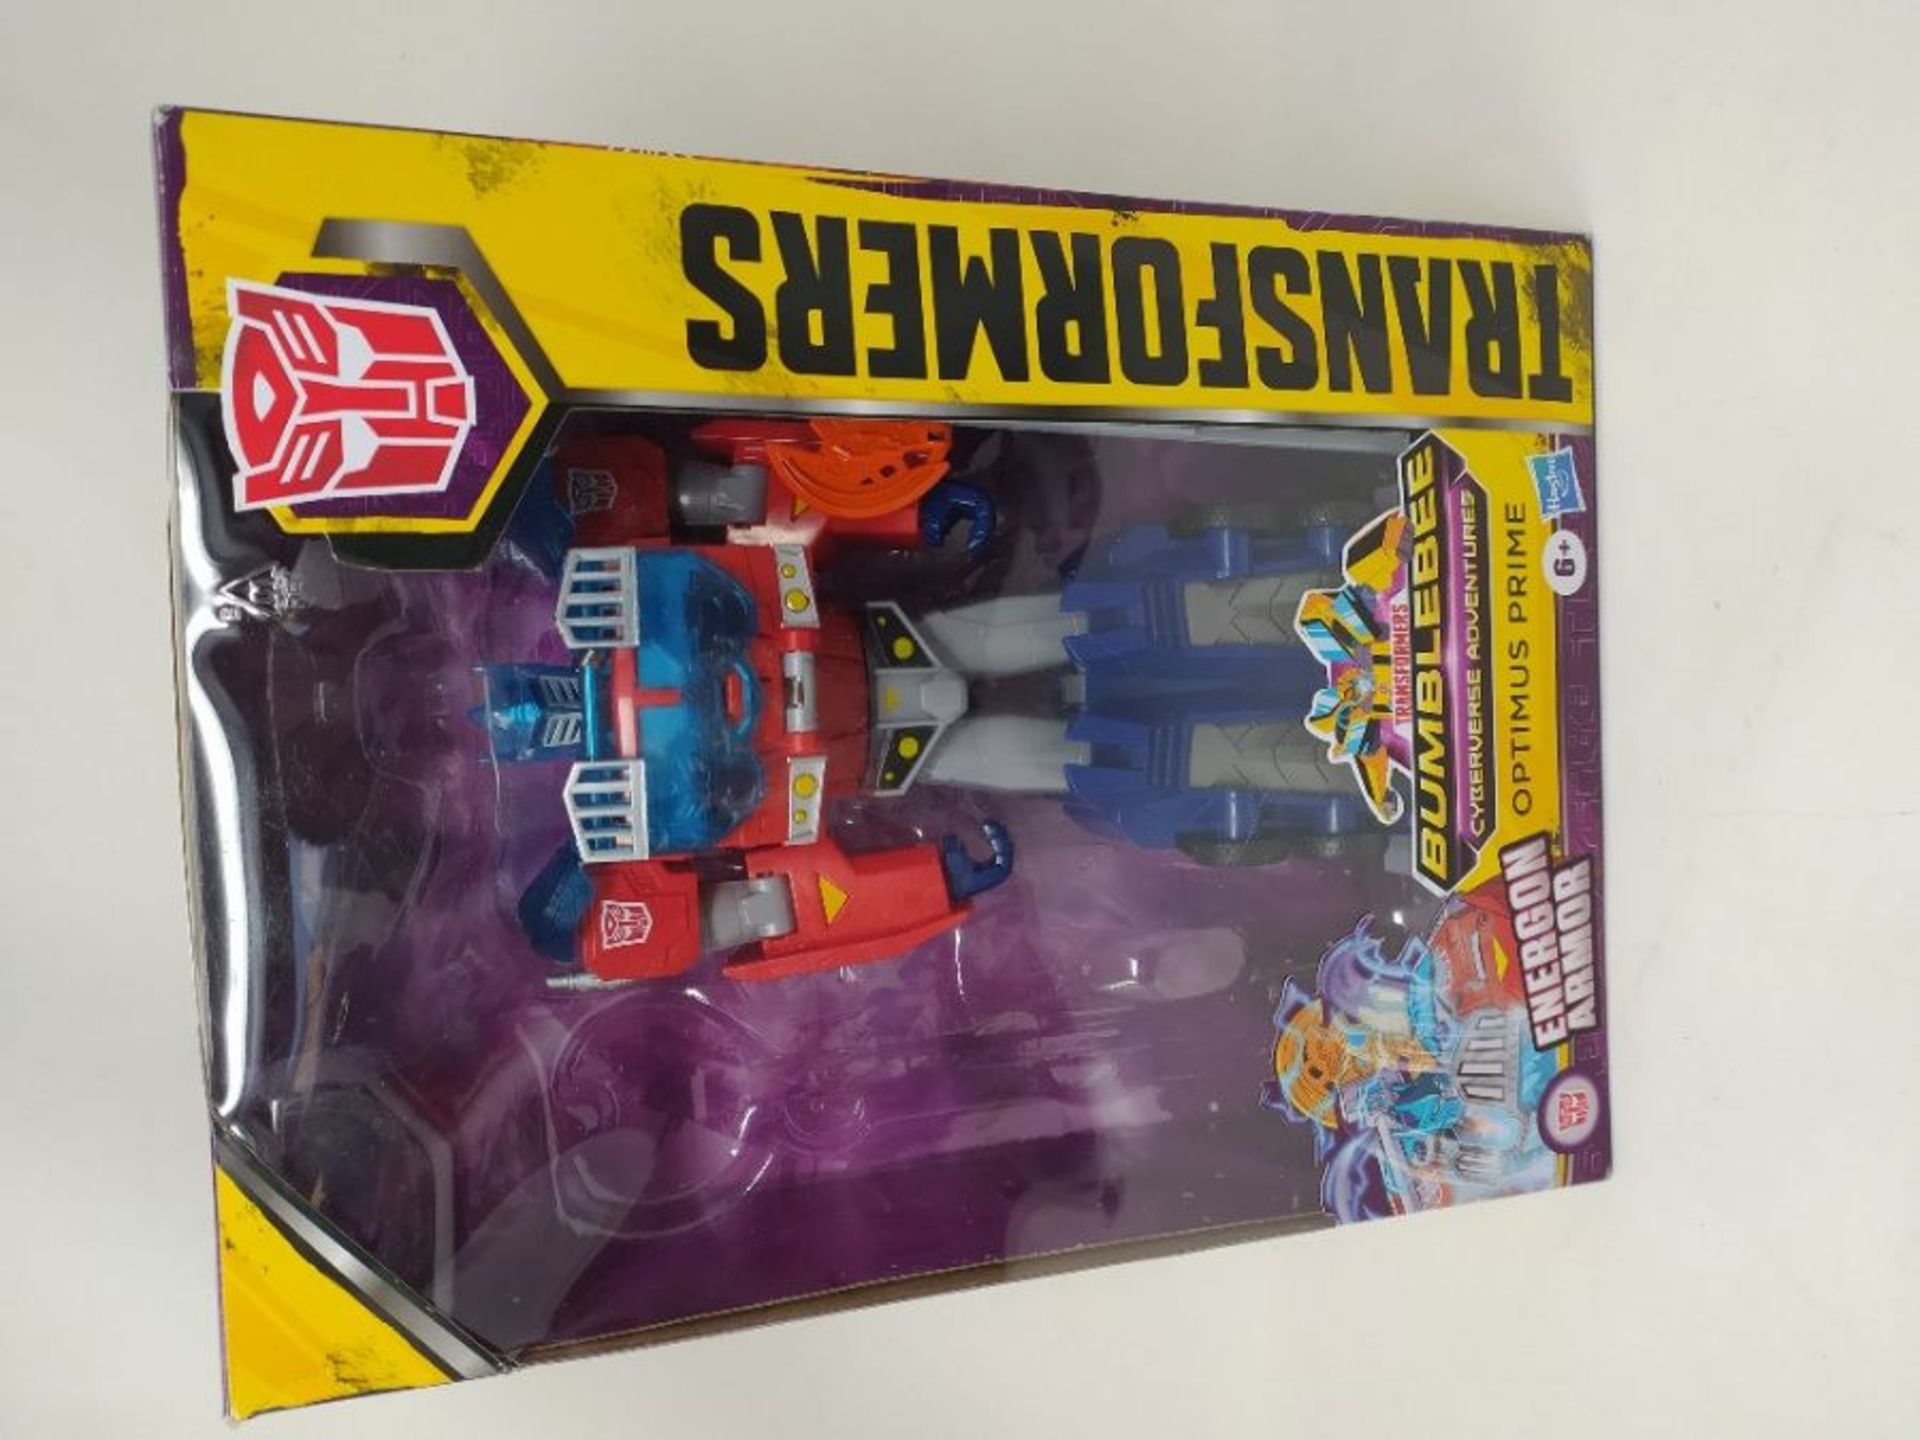 TRANSFORMERS Toys Cyberverse Ultimate Class Optimus Prime Action Figure - Combines wit - Image 2 of 3